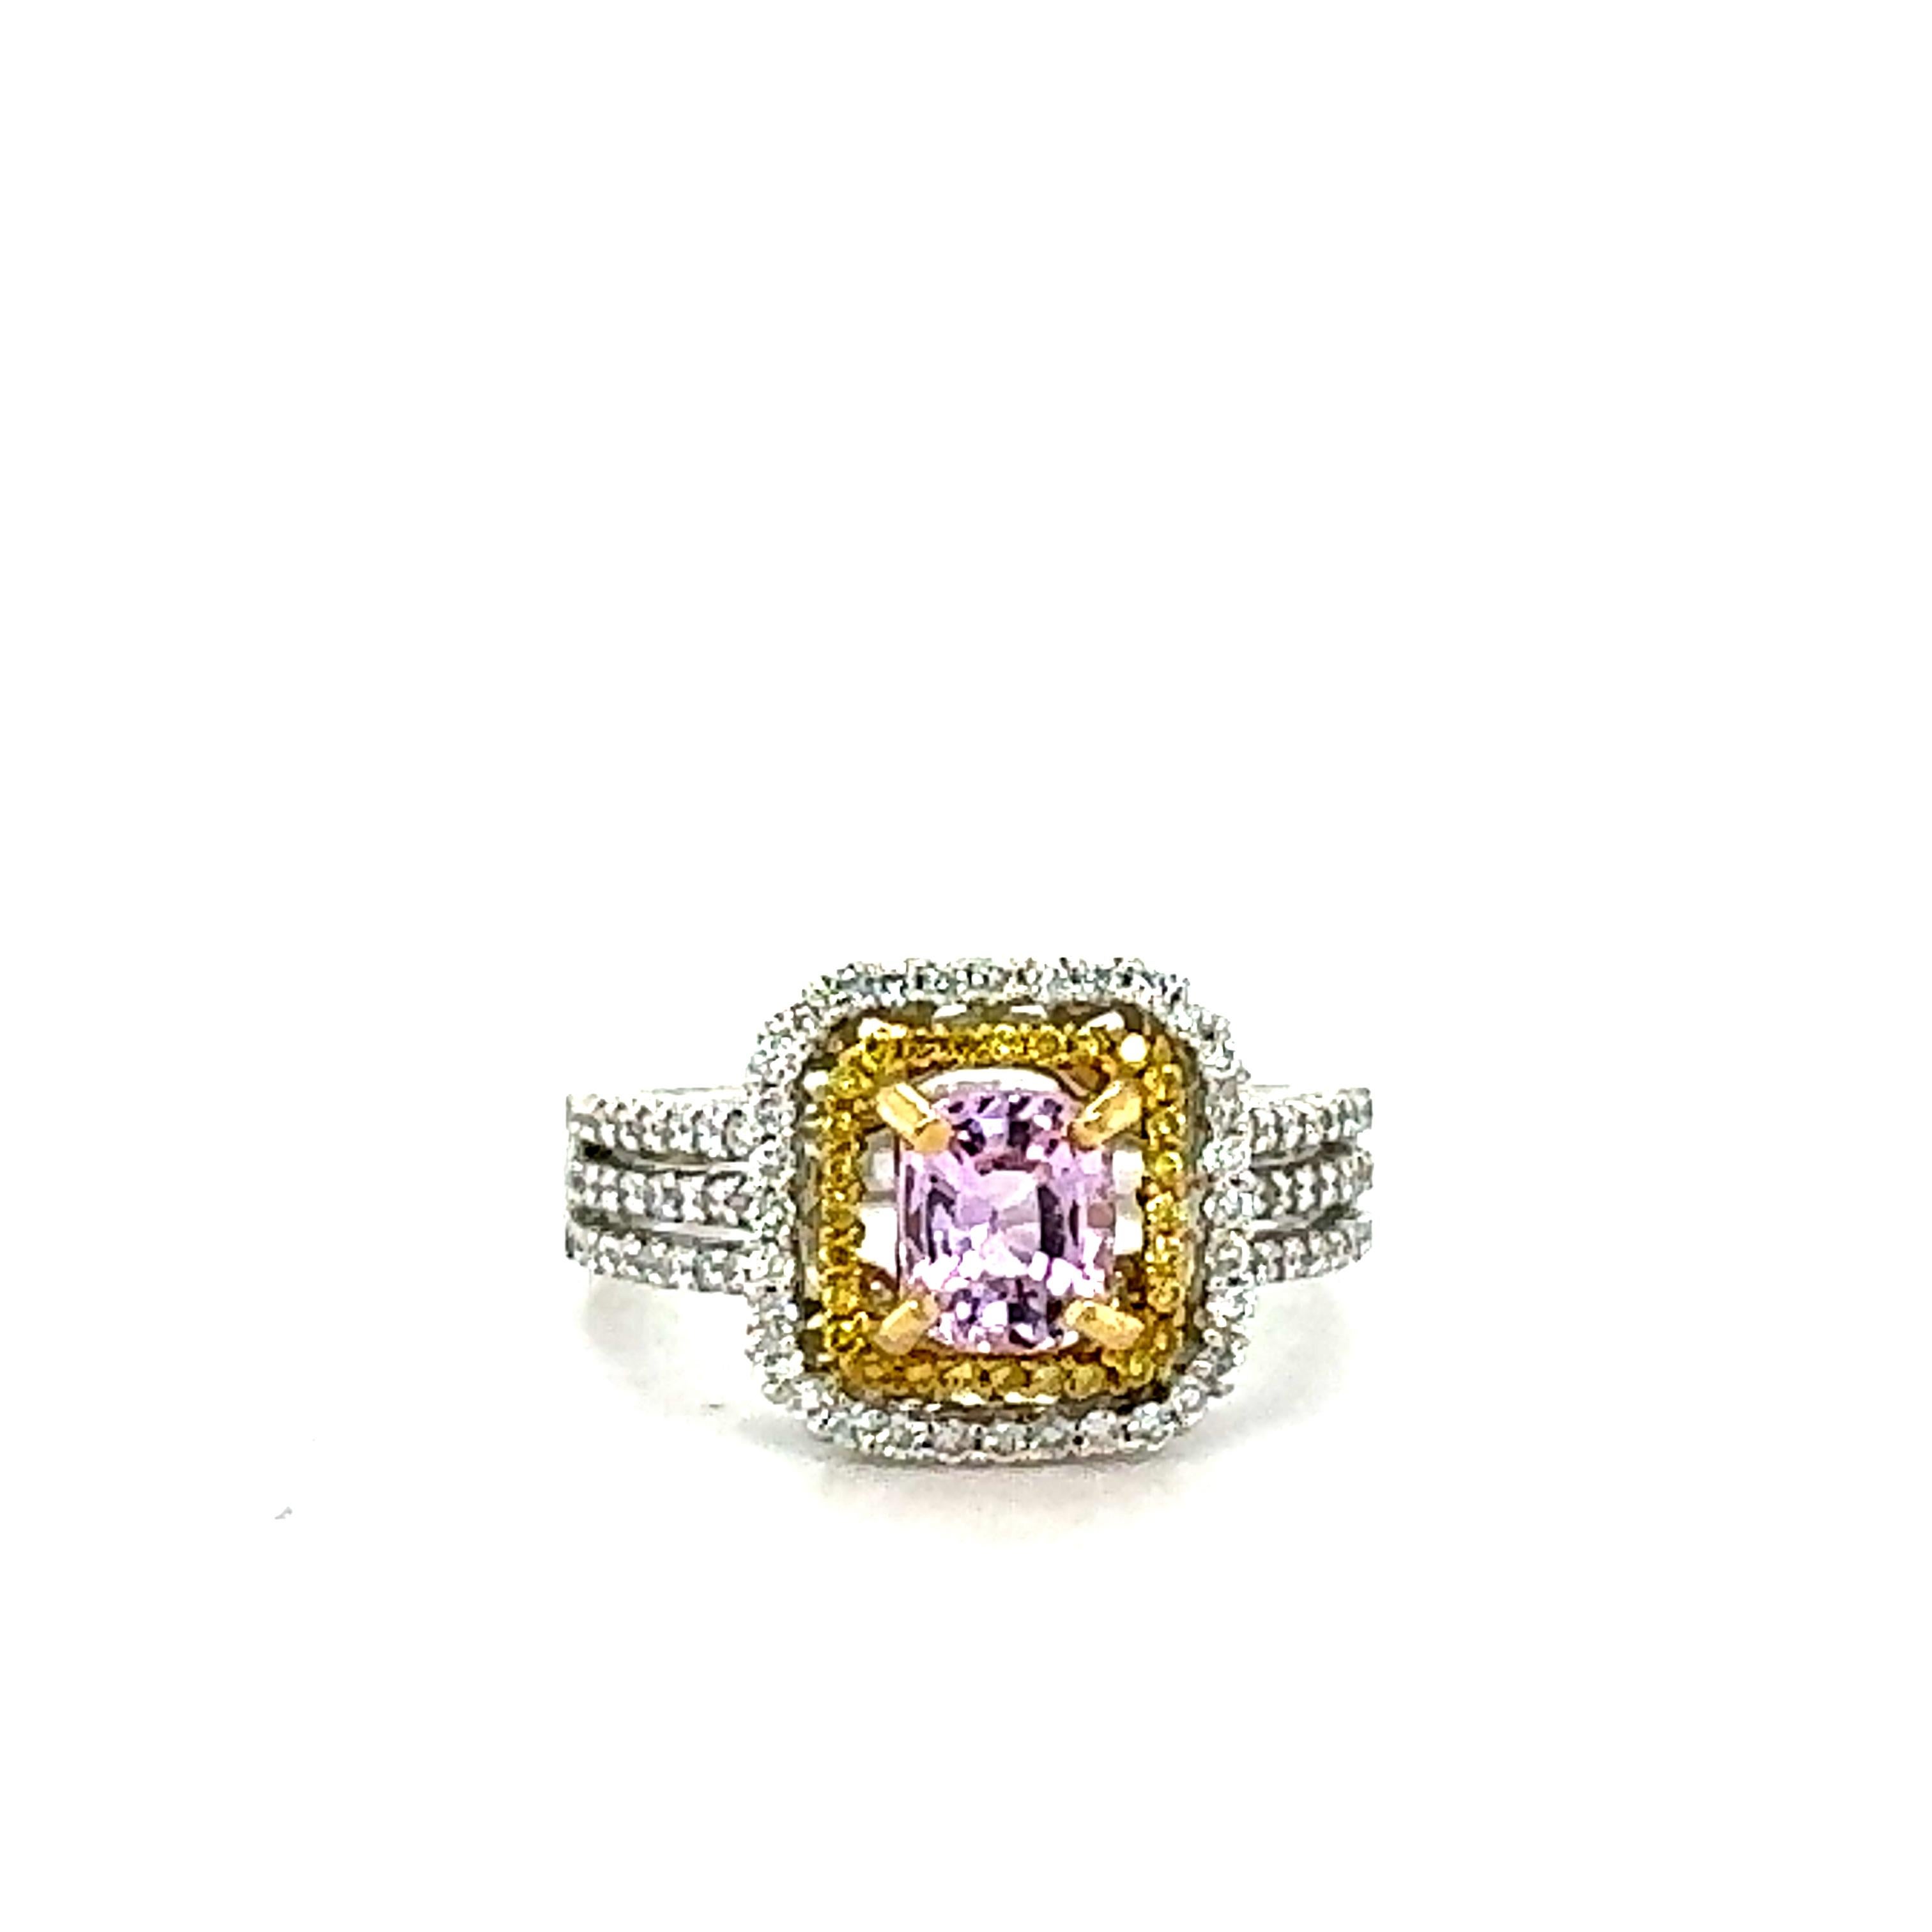 1.53 Carat Natural Pink Sapphire Diamond White Gold Engagement Ring

Simply the most elegant and beautiful Pink Sapphire and Yellow and White Diamond Engagement or Wedding Ring!

The center is a Natural Unheated Cushion Cut Pink Sapphire and weighs